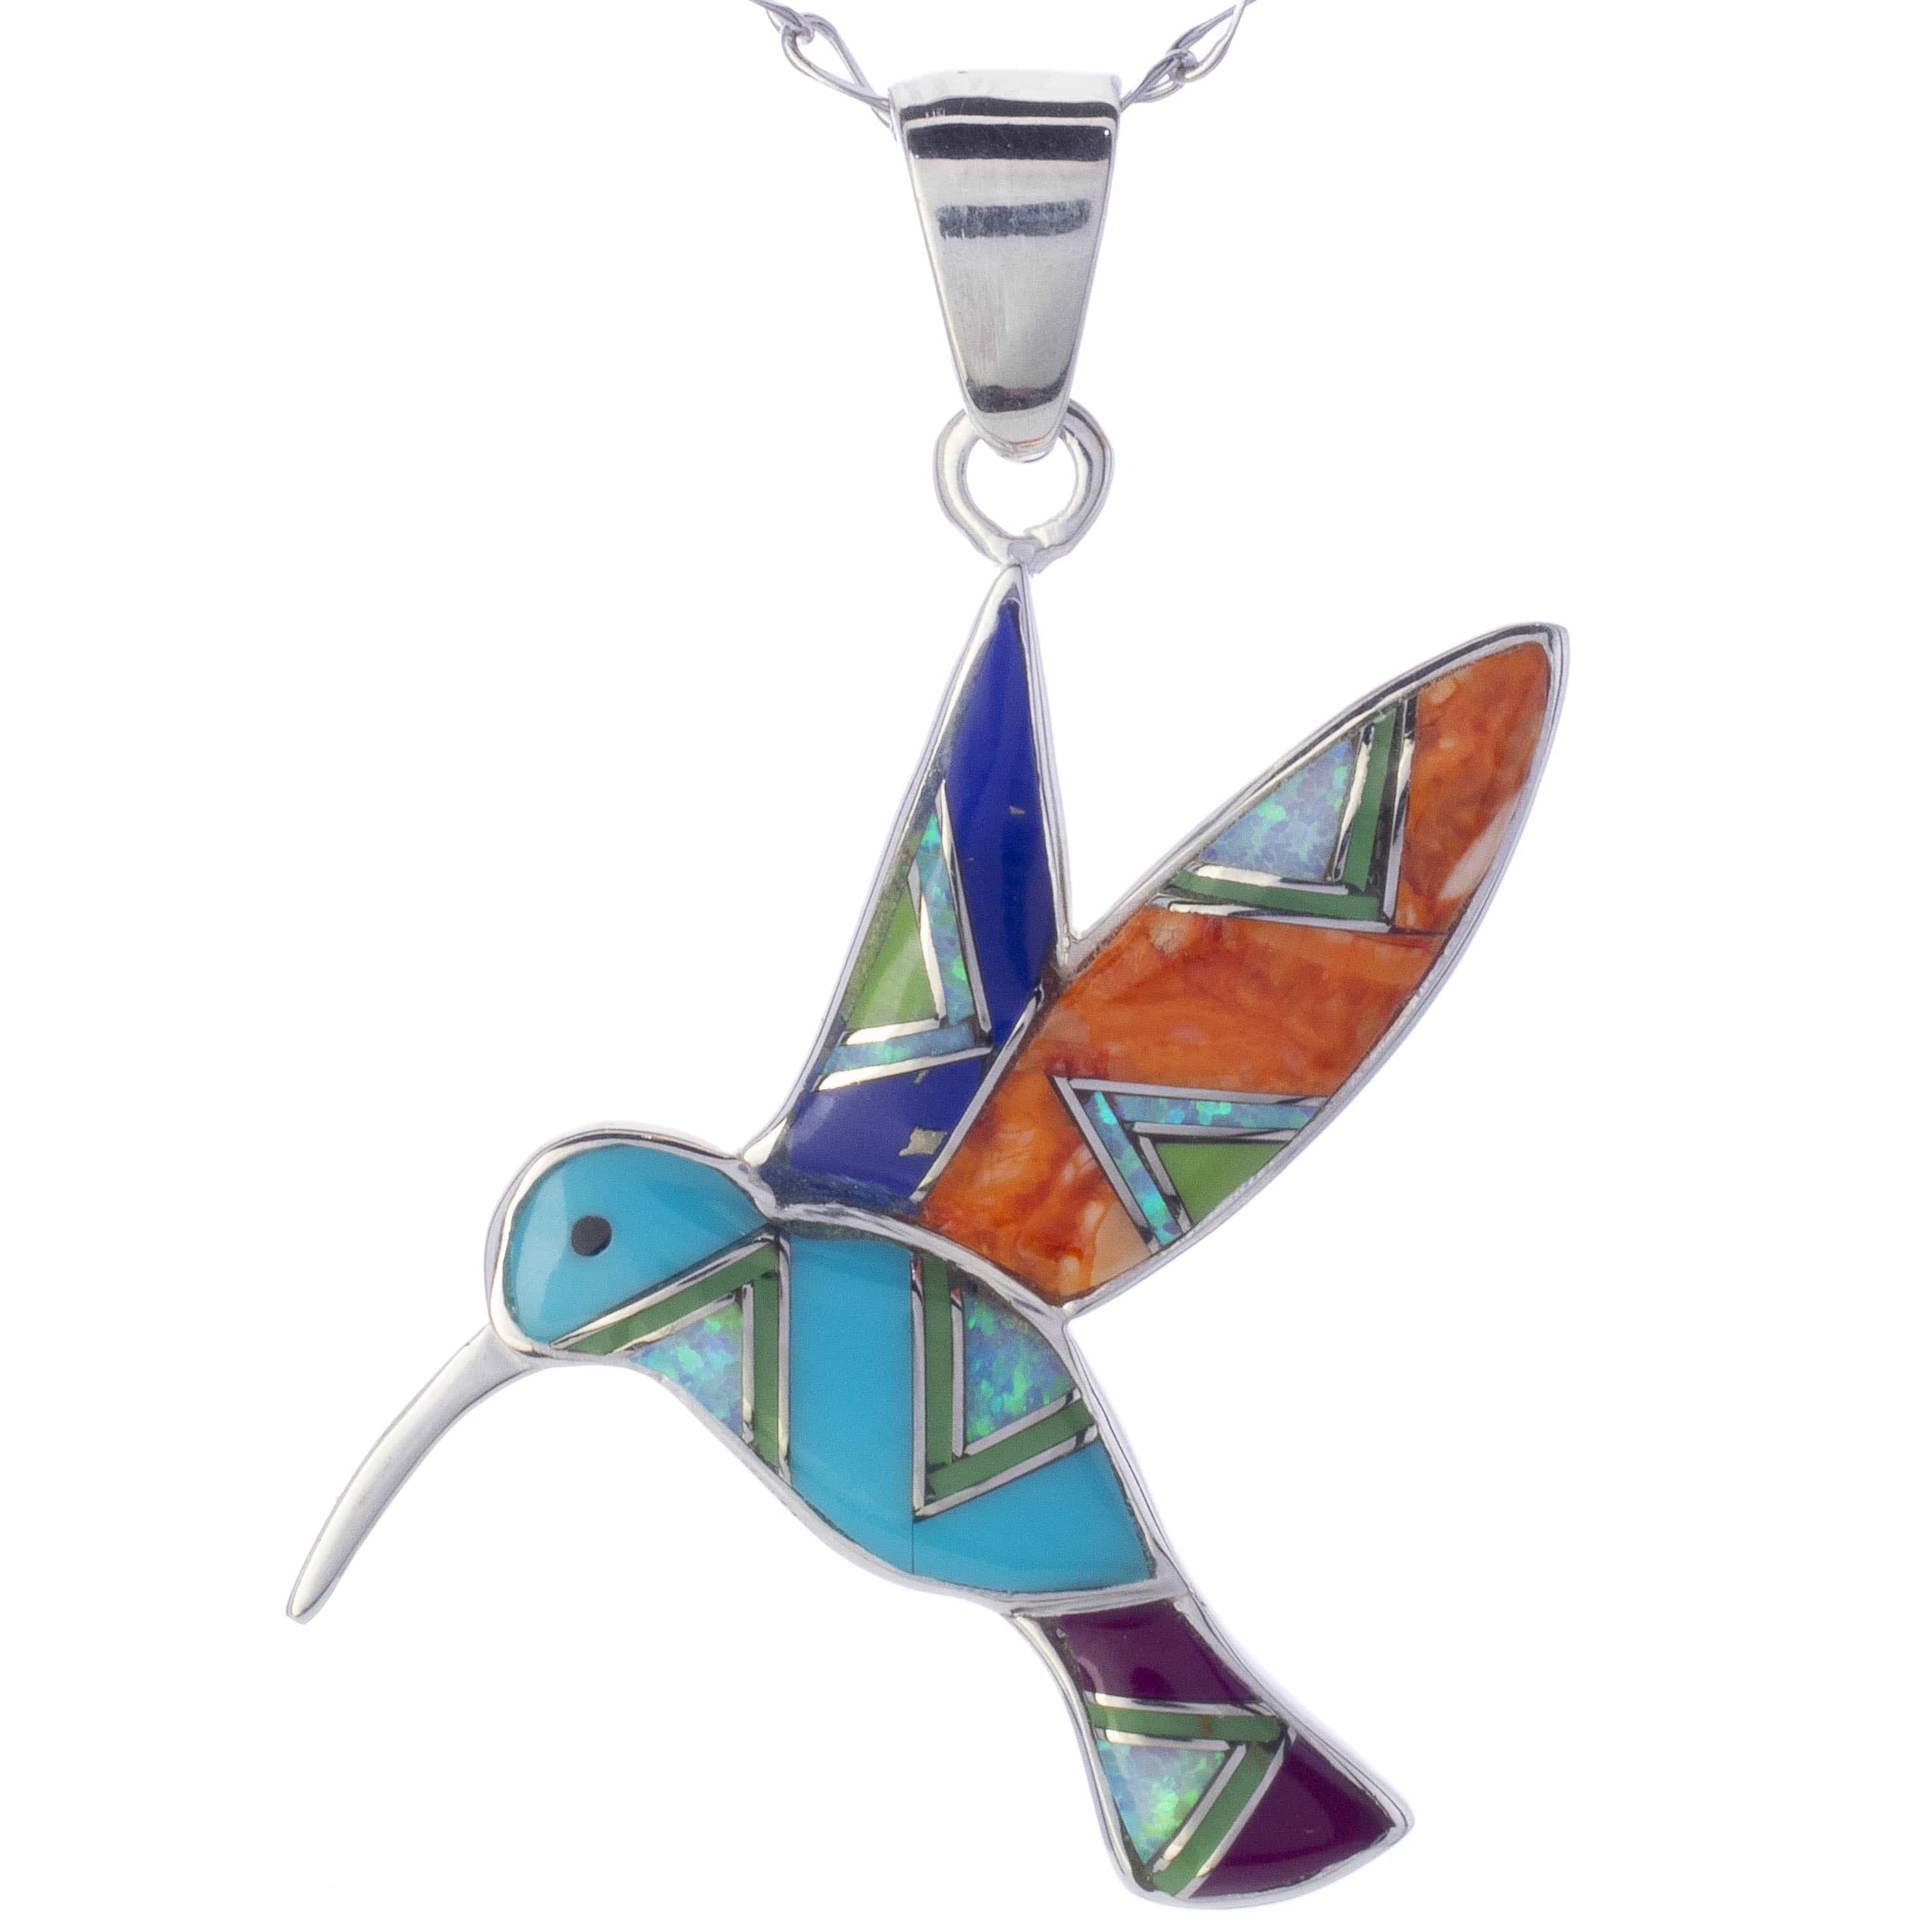 Kalifano Southwest Silver Jewelry Multi Gemstone Hummingbird 925 Sterling Silver Pendant USA Handmade with Opal Accent NMN.2323.MT